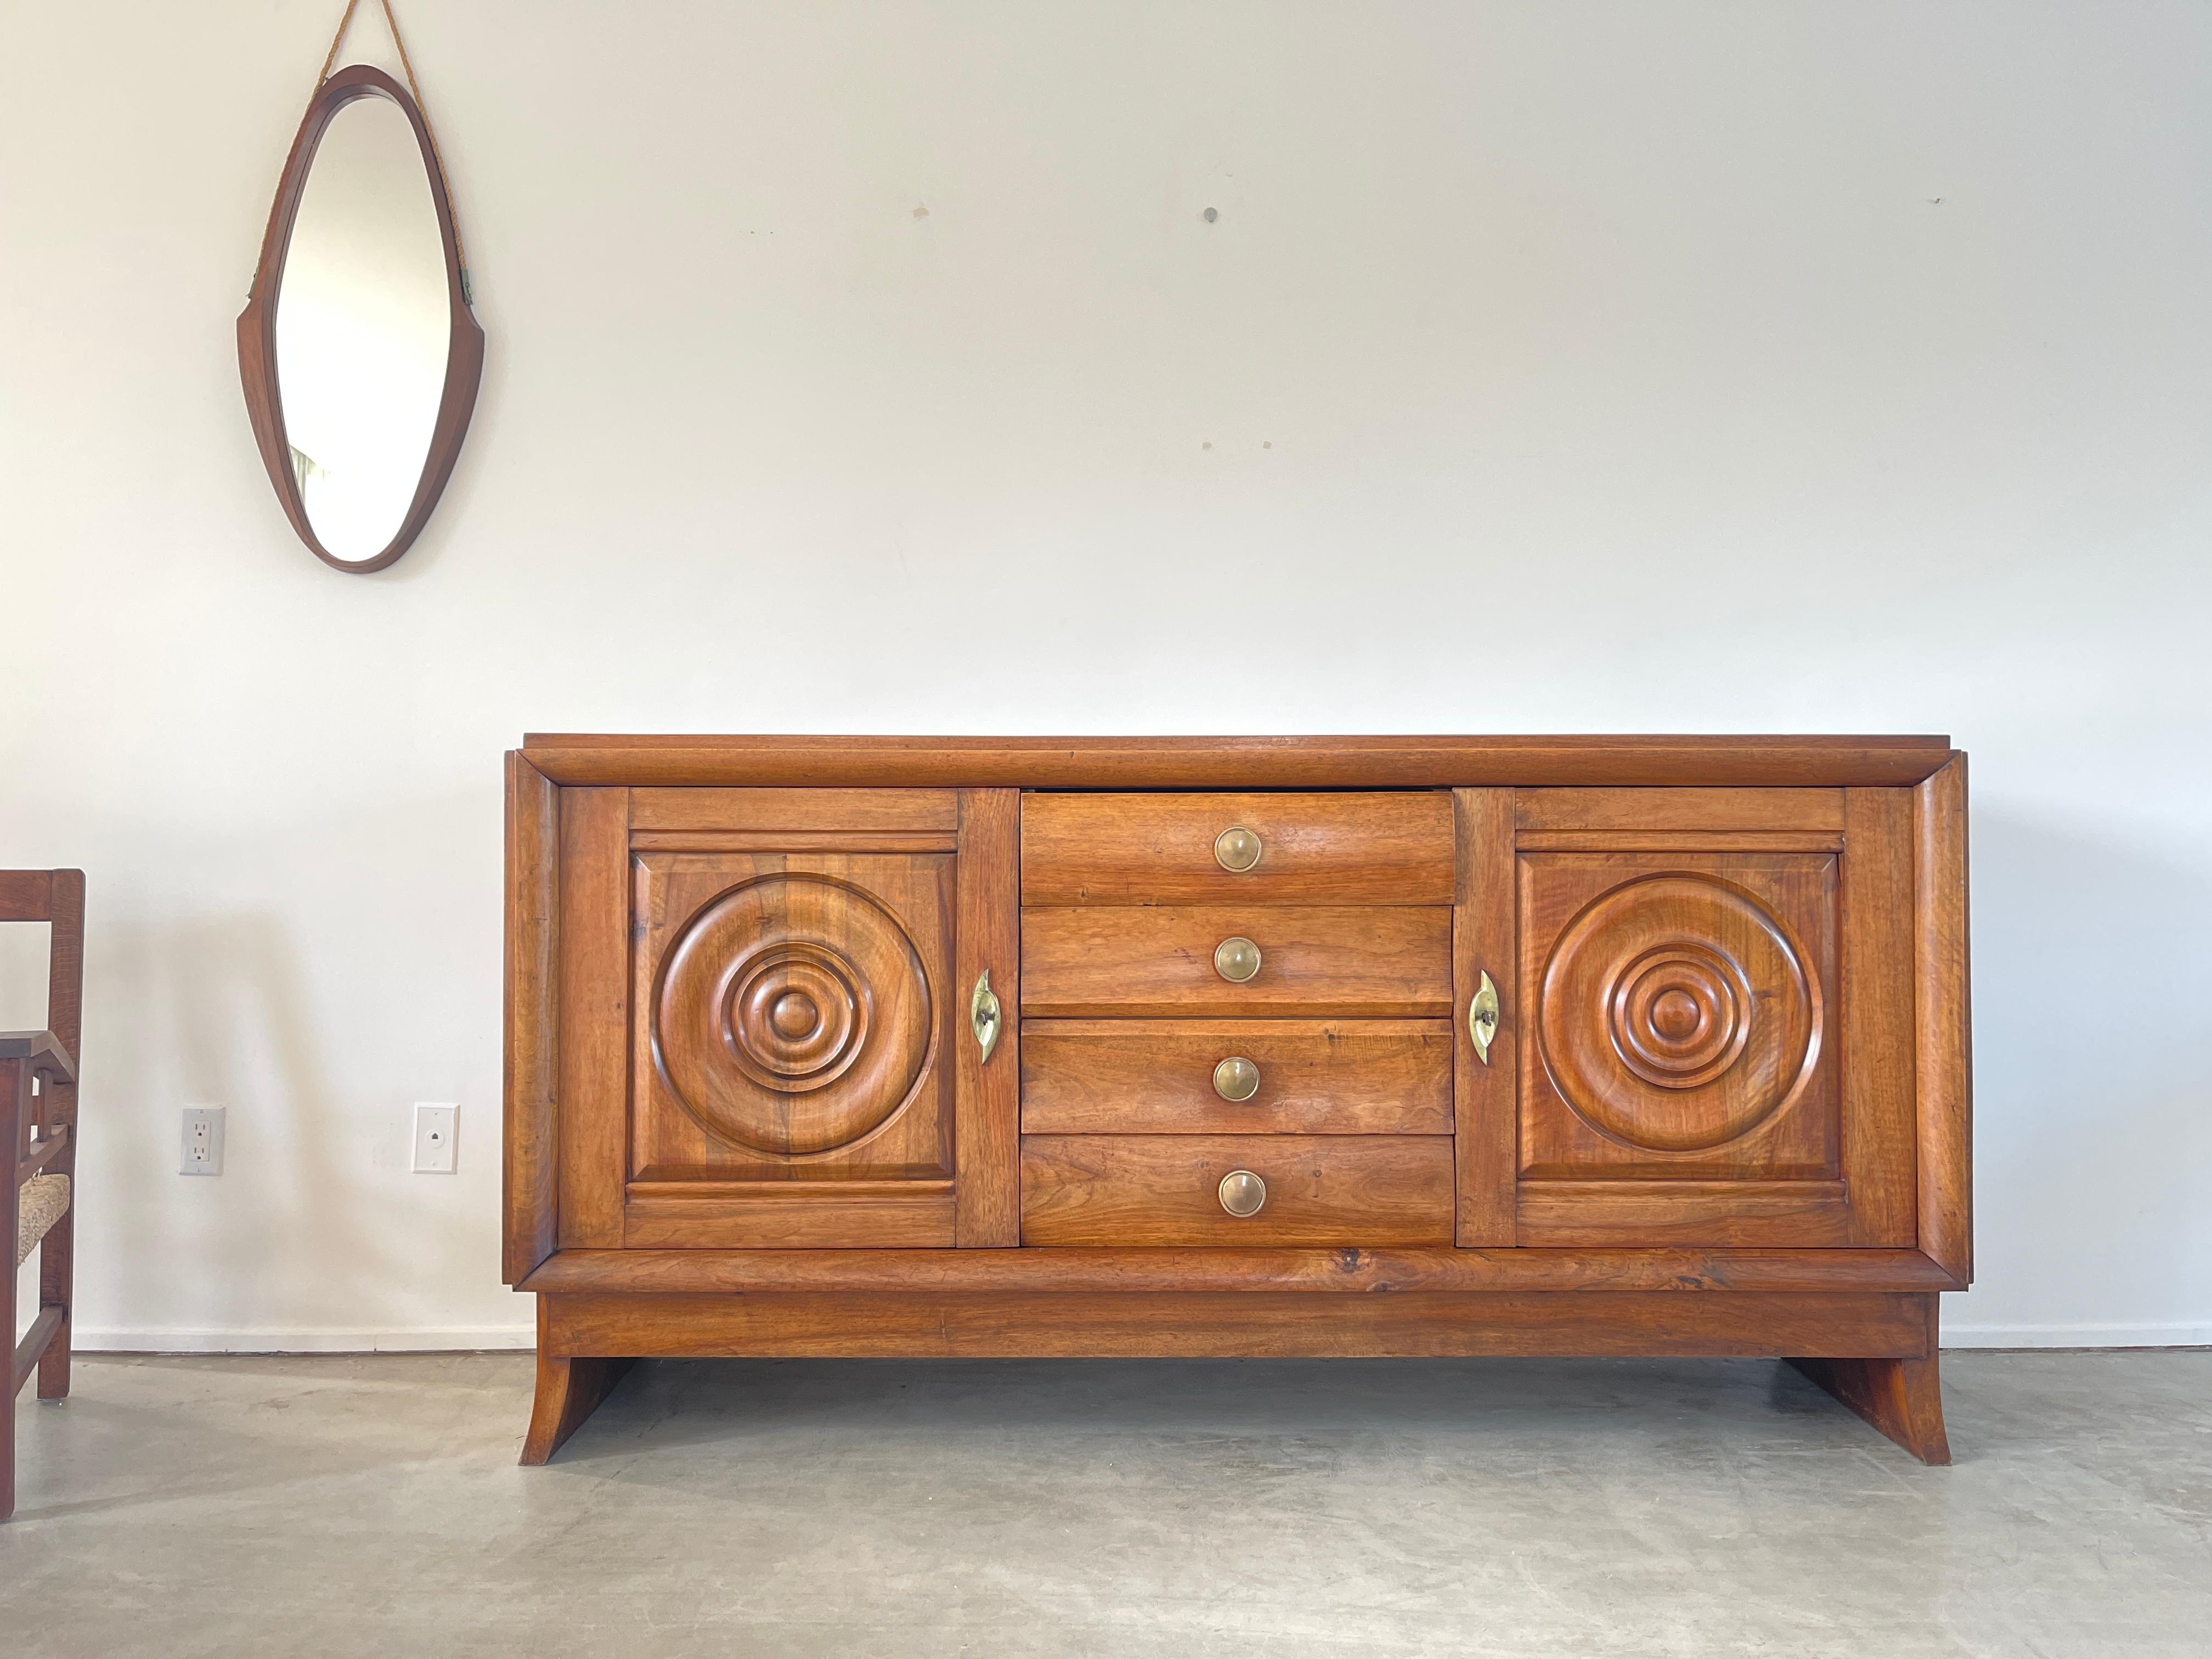 1930's French walnut cabinet with concentric circle carvings on each door and ornate detail throughout. 
Original brass hardware - open shelving with center drawers
Original finish with wonderful patina.